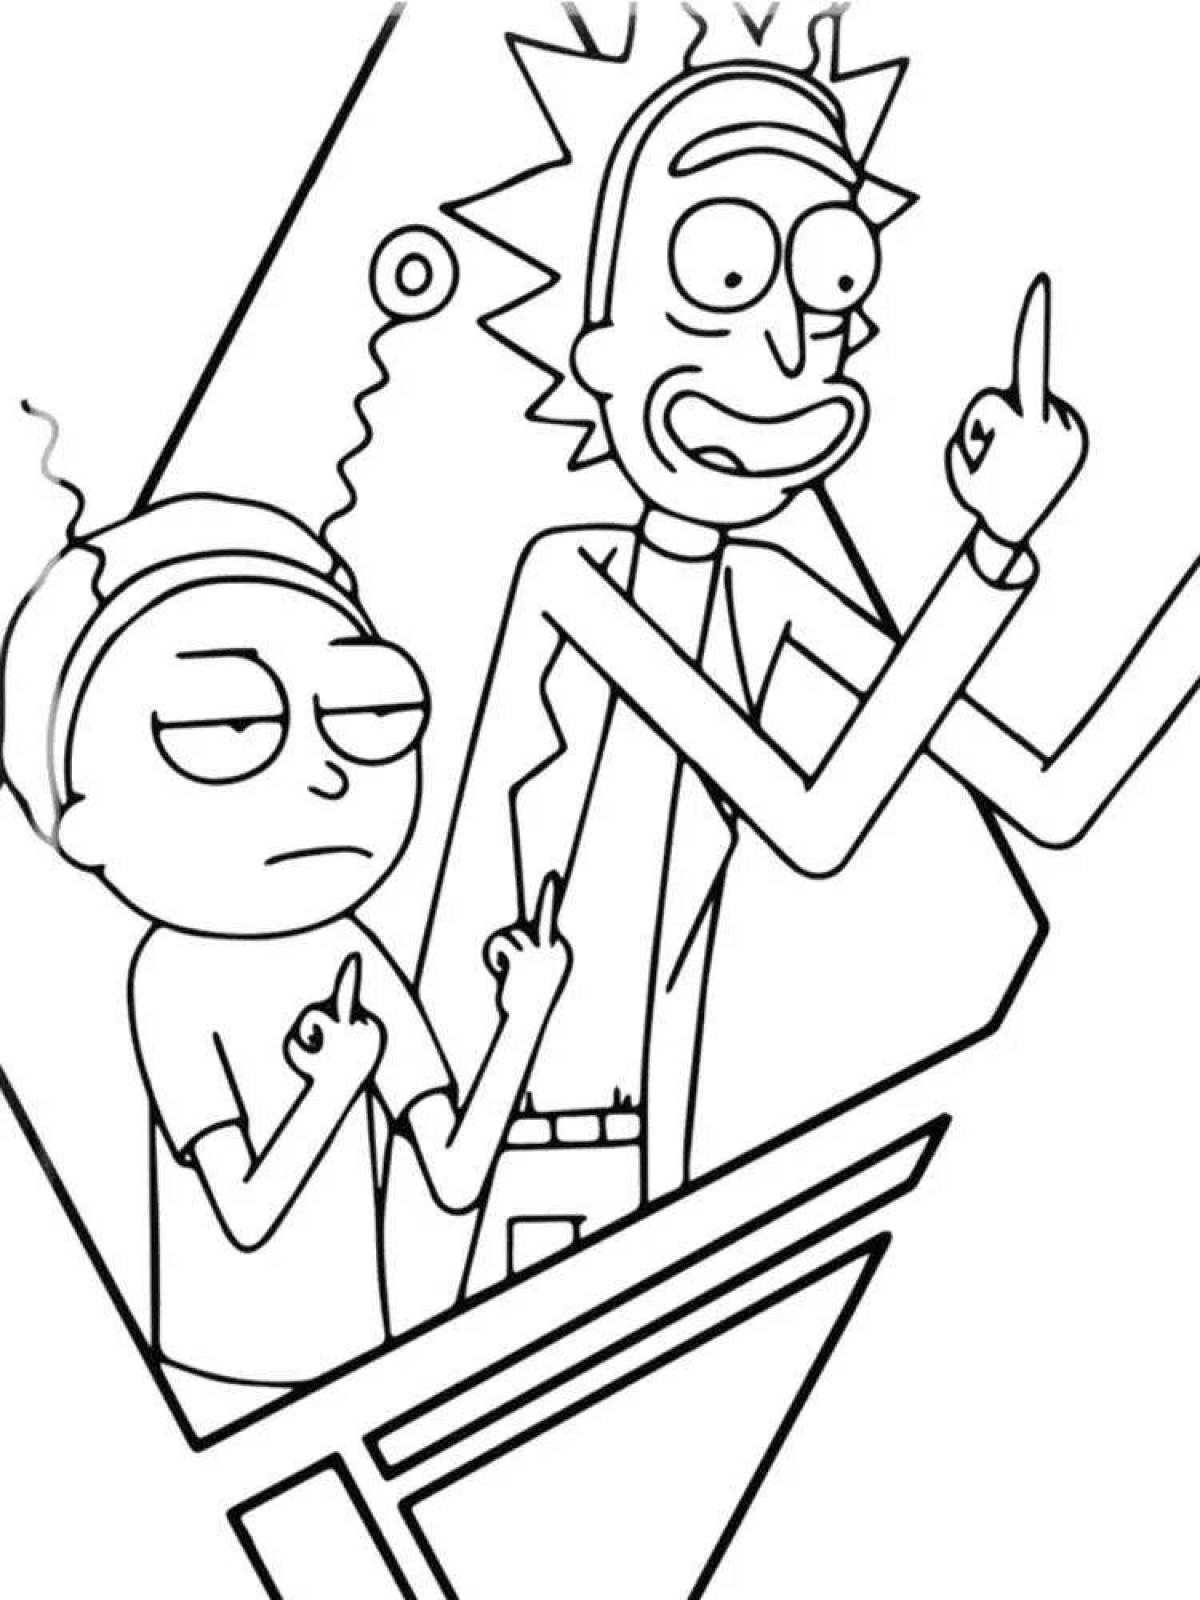 Rick's coloring page